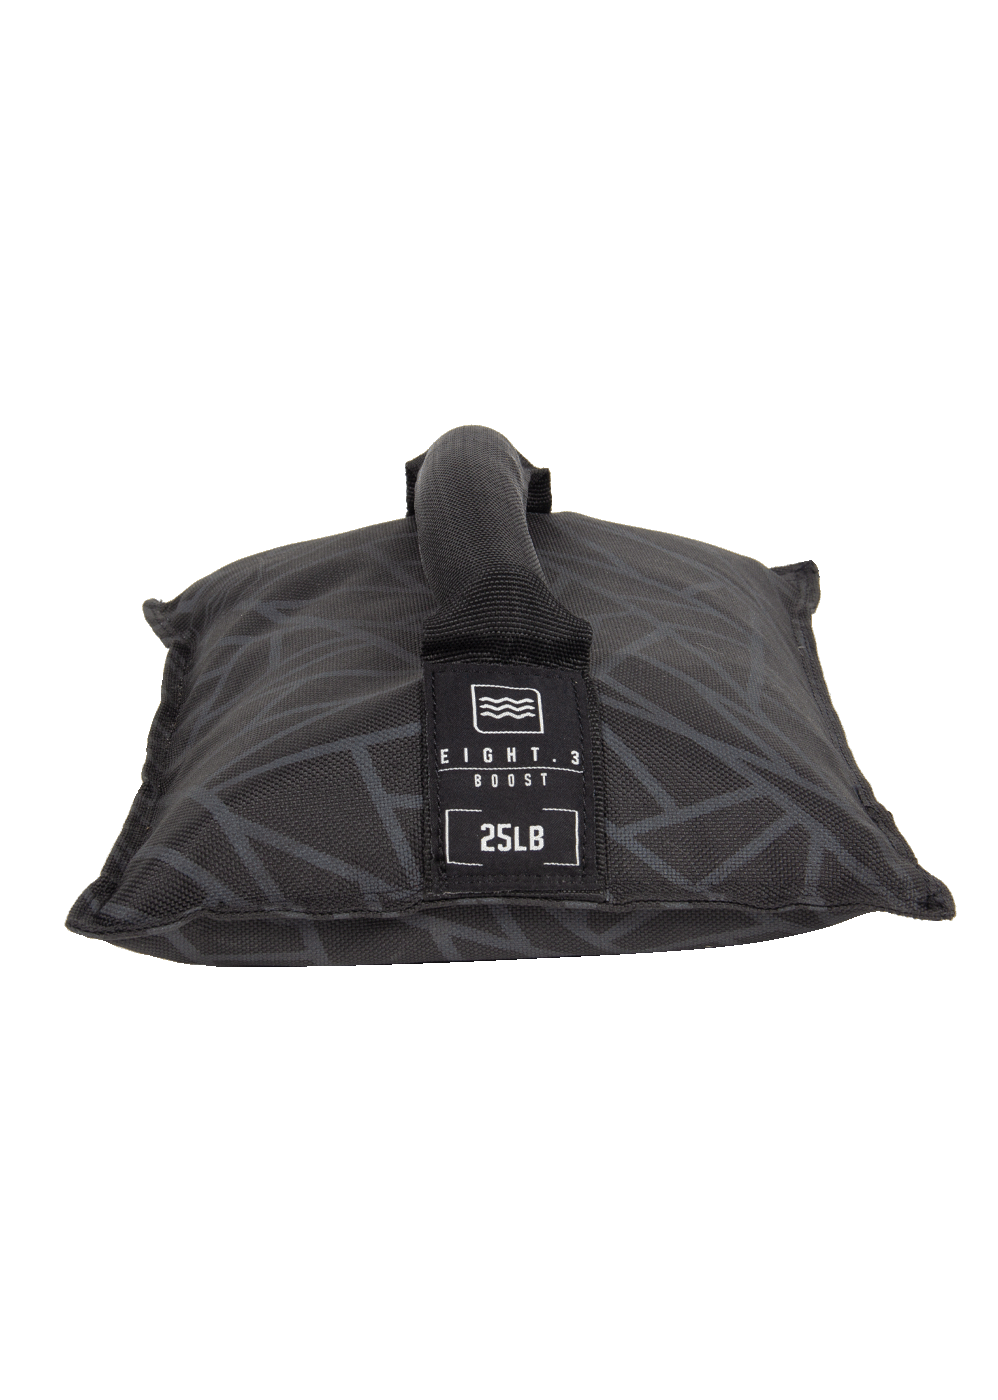 RONIX BOOST BAGS